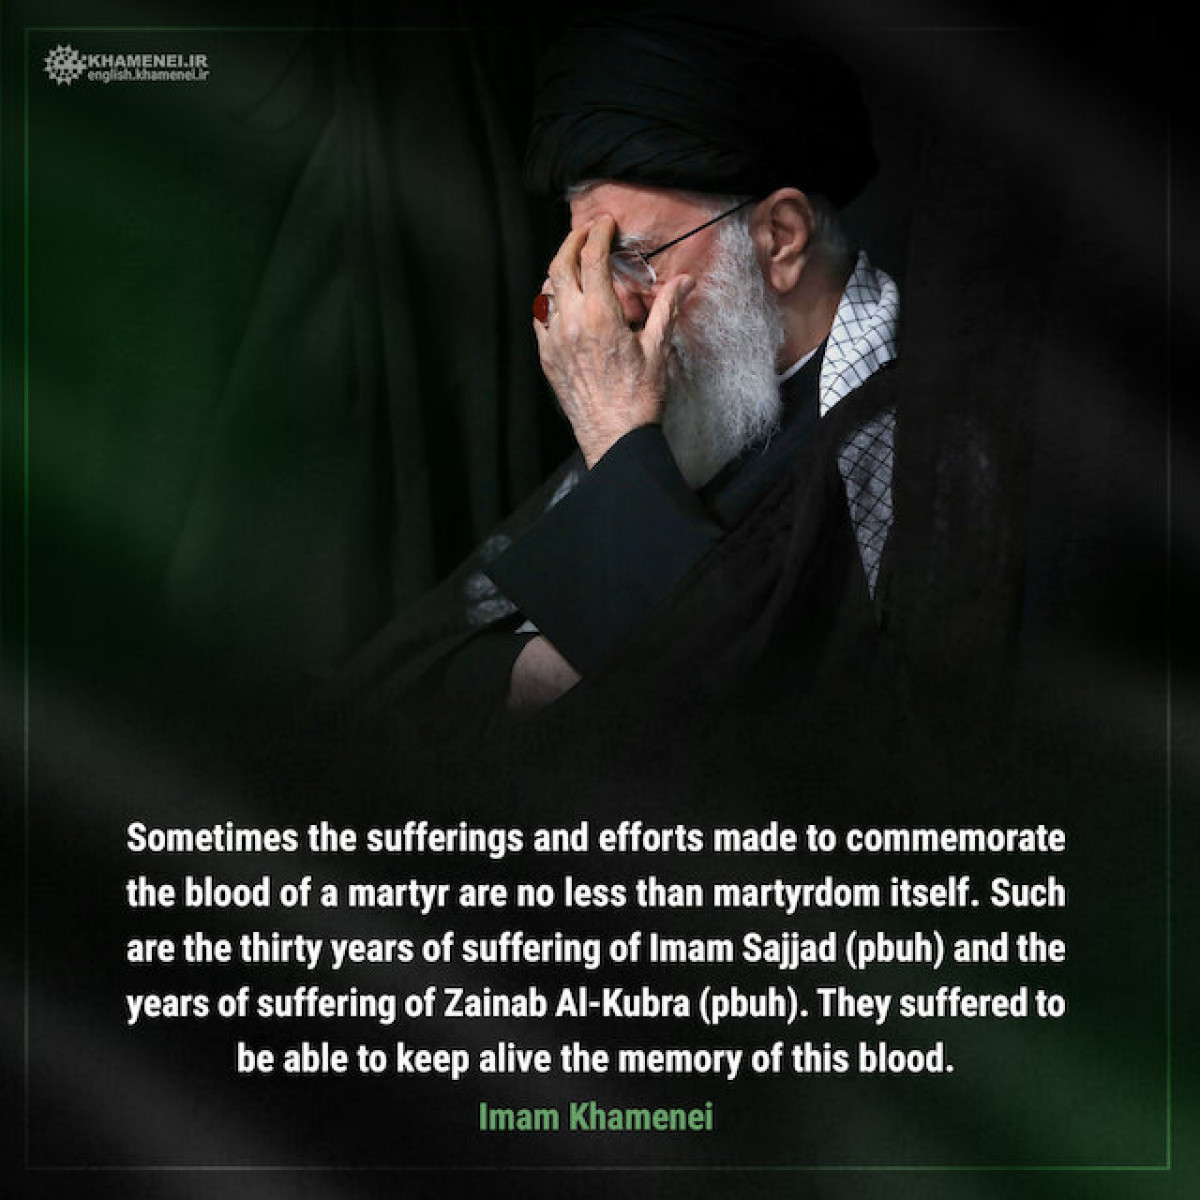 Commemorating the blood of martyrs of Karbala